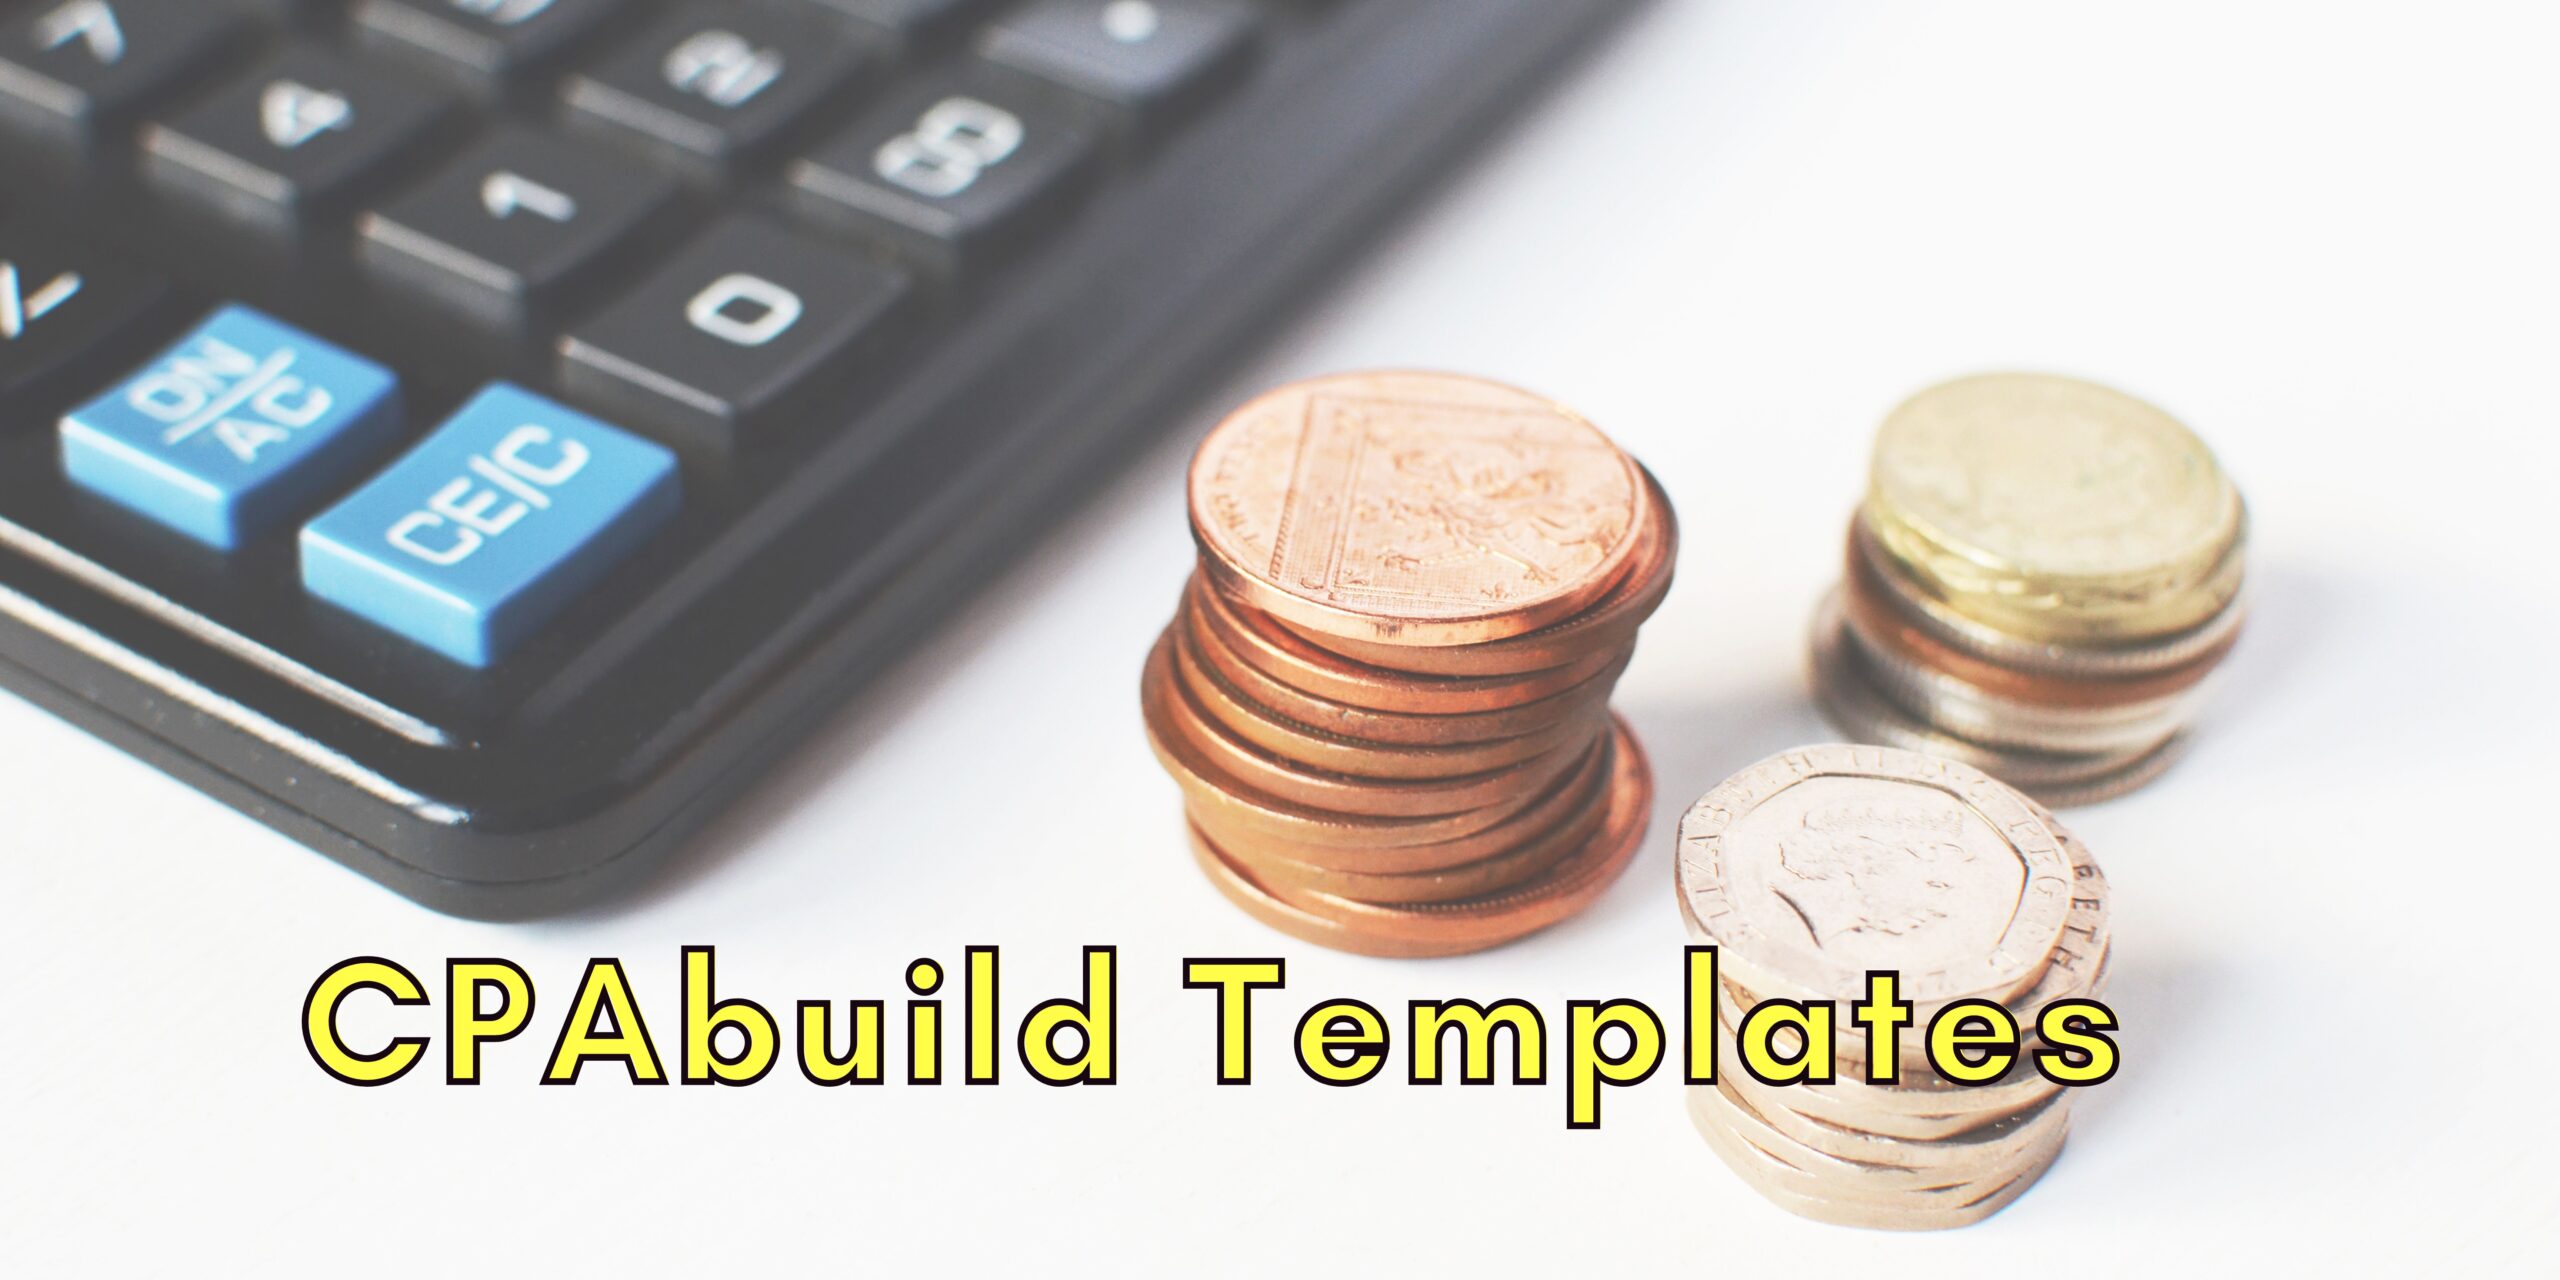 CPAbuild templates that can make you earn $200 to $500 per month